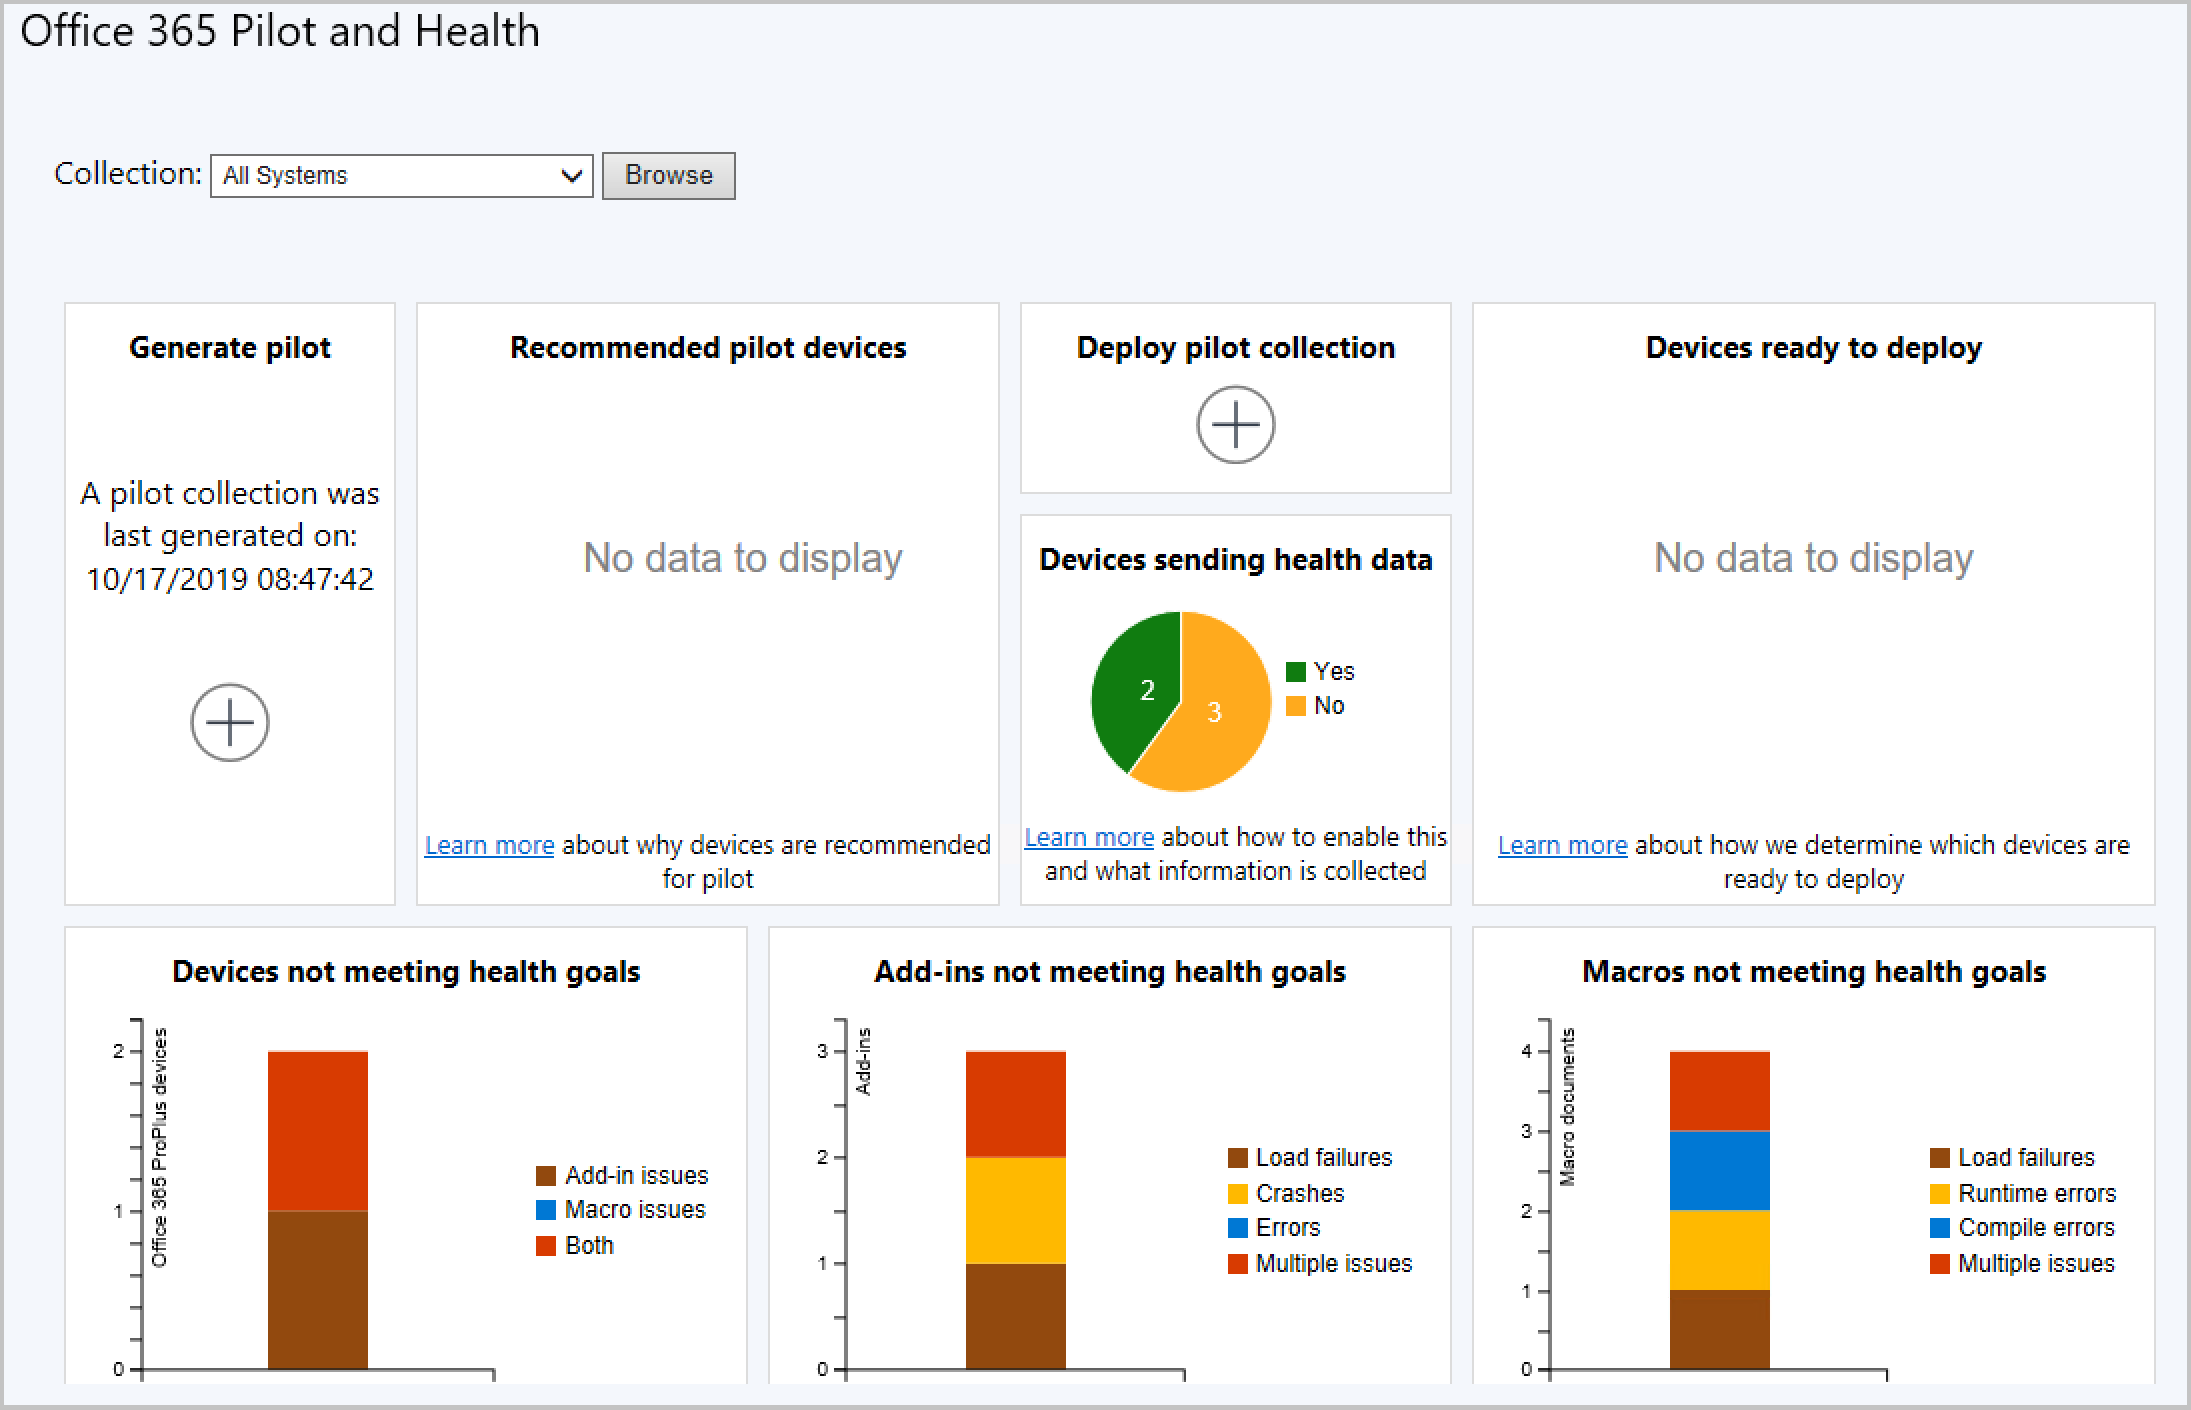 Office 365 Pilot and Health dashboard